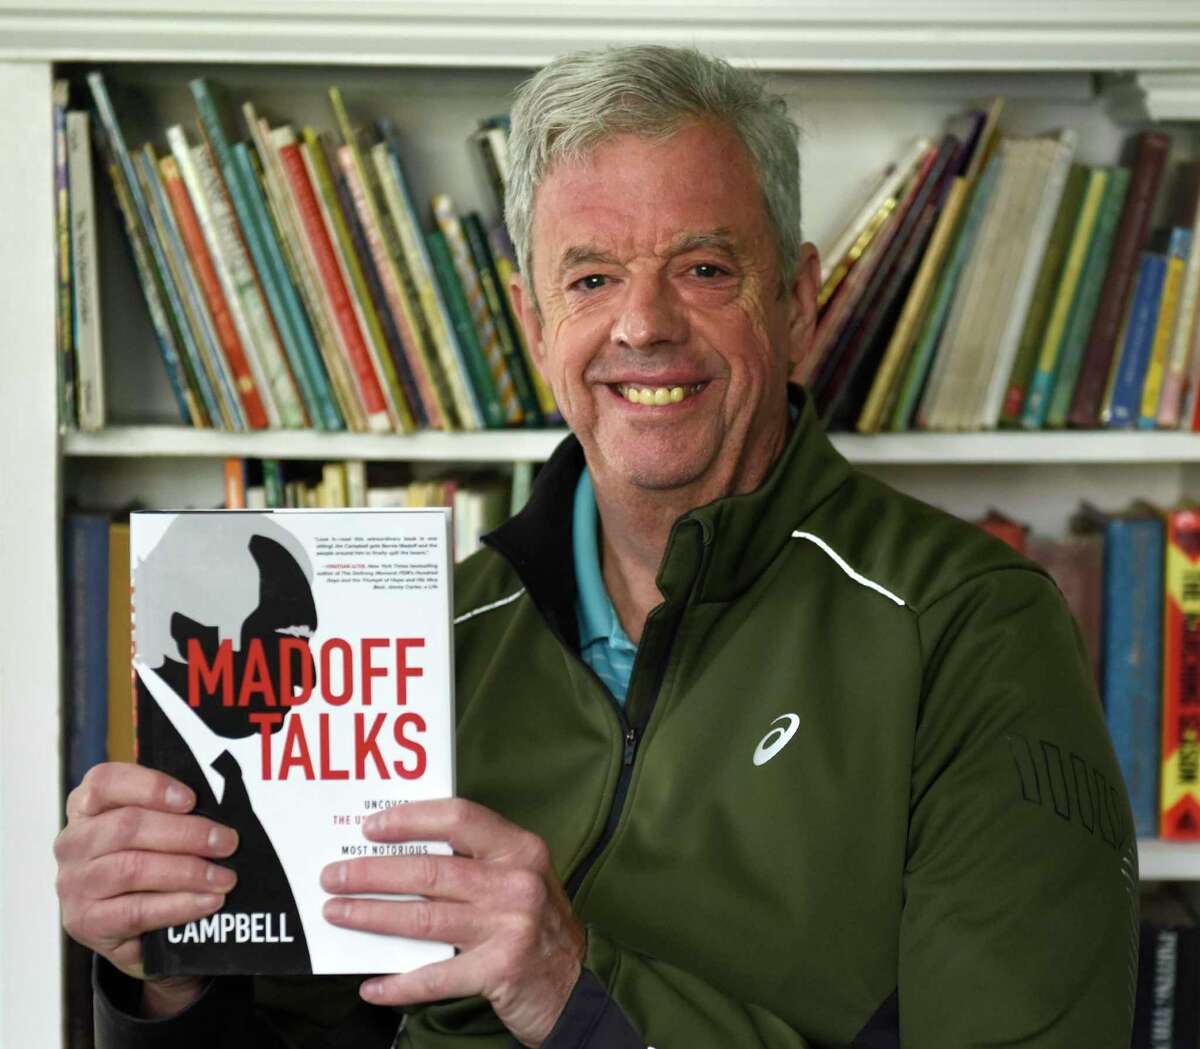 WGCH host Jim Campbell holds his new book "Madoff Talks" at his home in Old Greenwich, Conn. Thursday, April 22, 2021. Campbell has written a comprehensive new book about notorious Ponzi scheme fraudster Bernie Madoff.